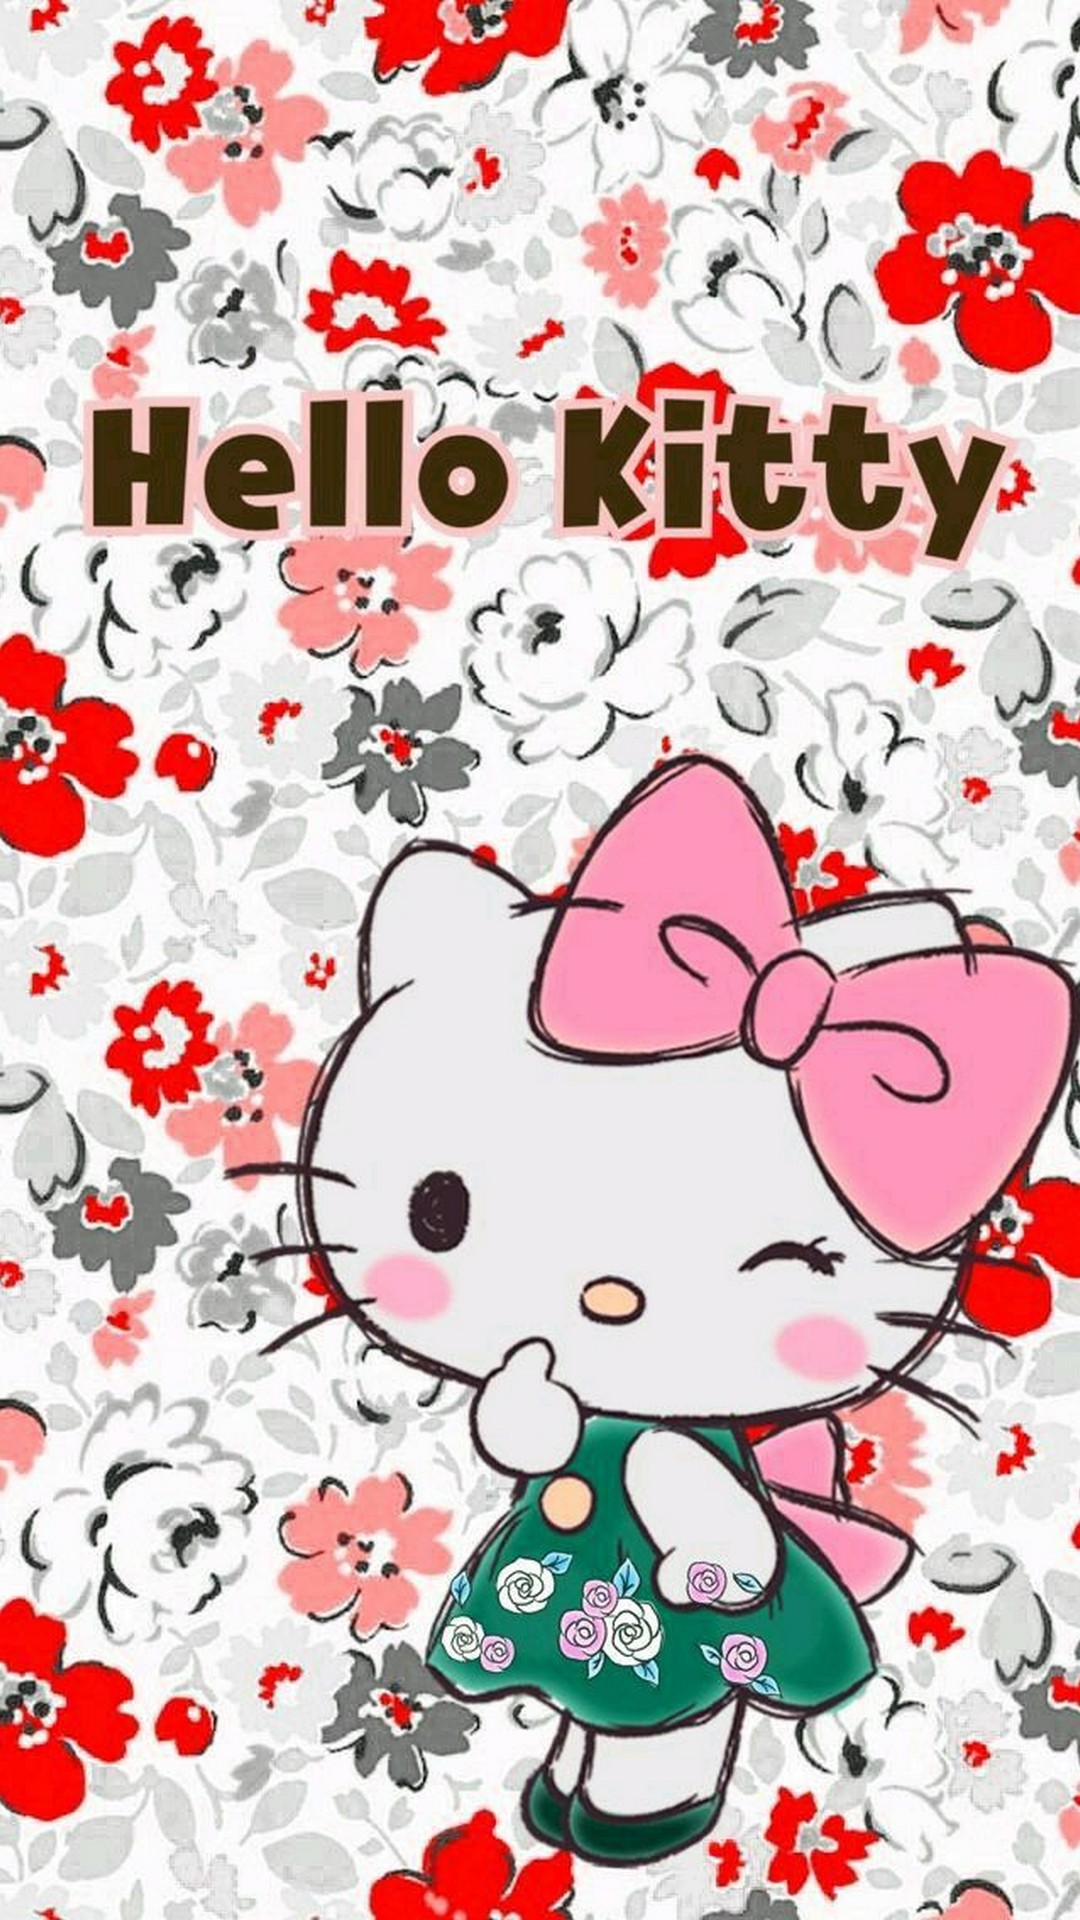 Hello Kitty Characters Wallpaper Android 2019 Android Wallpapers